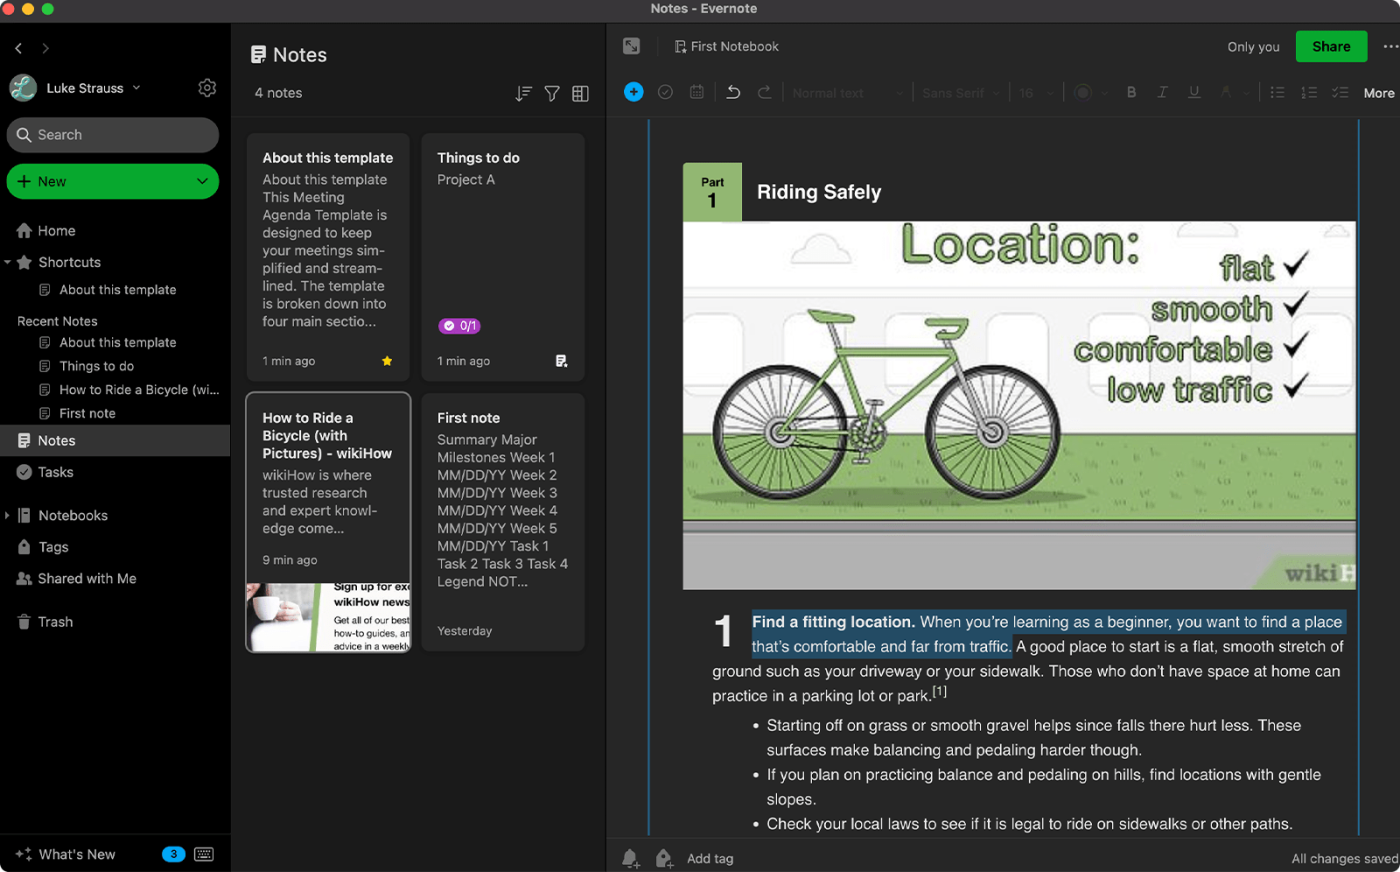 Screenshot showing Evernote's ability to interact with text—highlighting it, copying it, and navigating to all links that were on the page